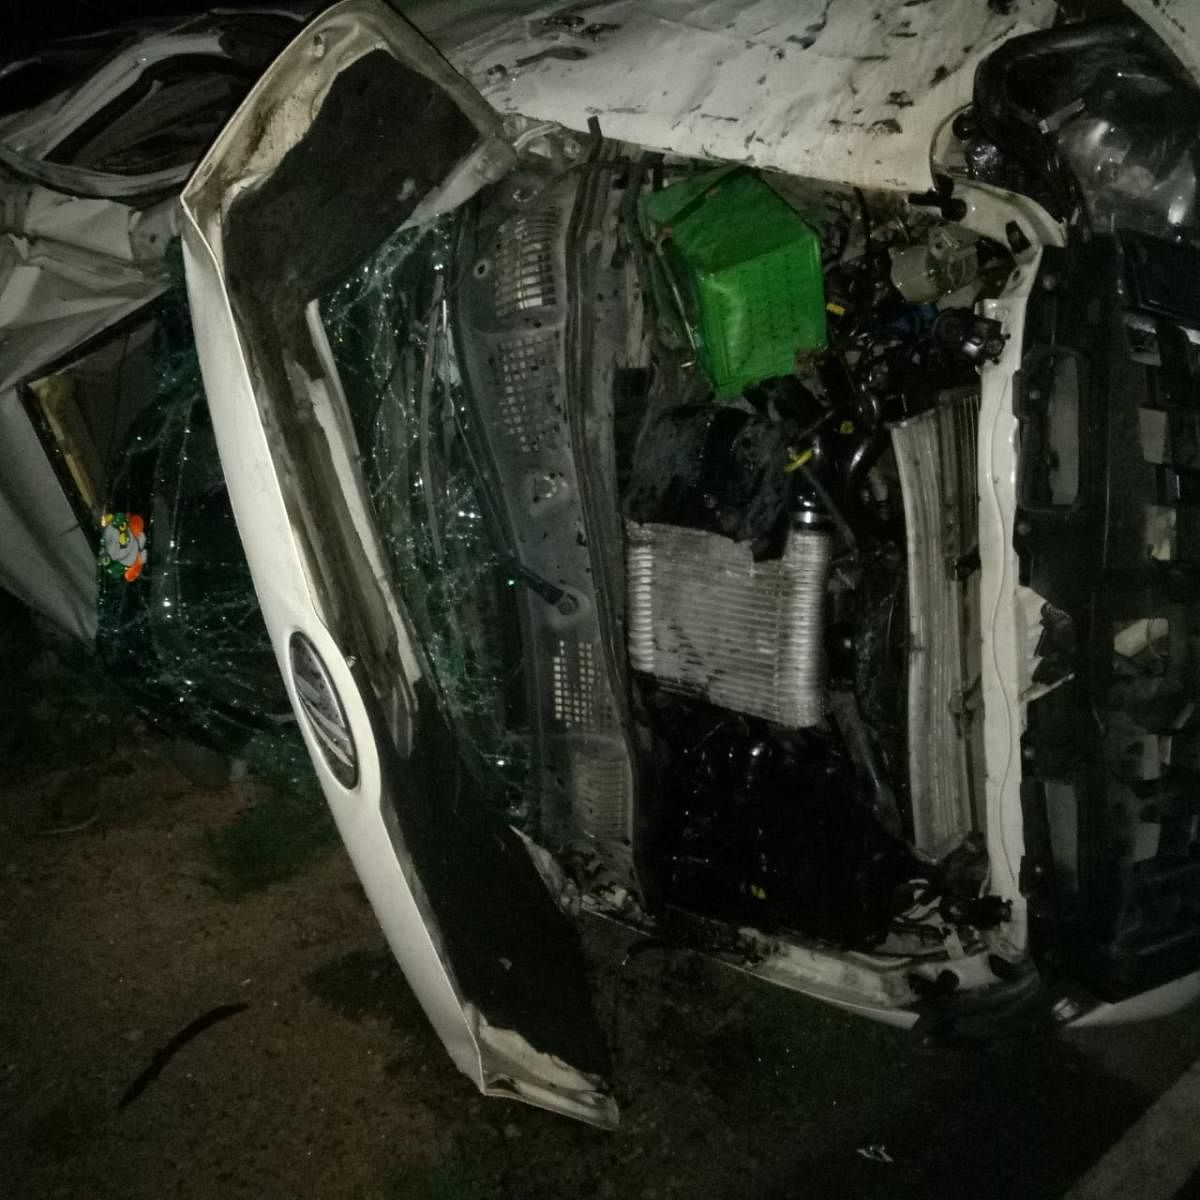 A pre-dawn outing to Nandi Hills turned fatal for four people as their SUV toppled after hitting a road divider on the northern outskirts of Bengaluru on Saturday. The crash also left five others wounded. 